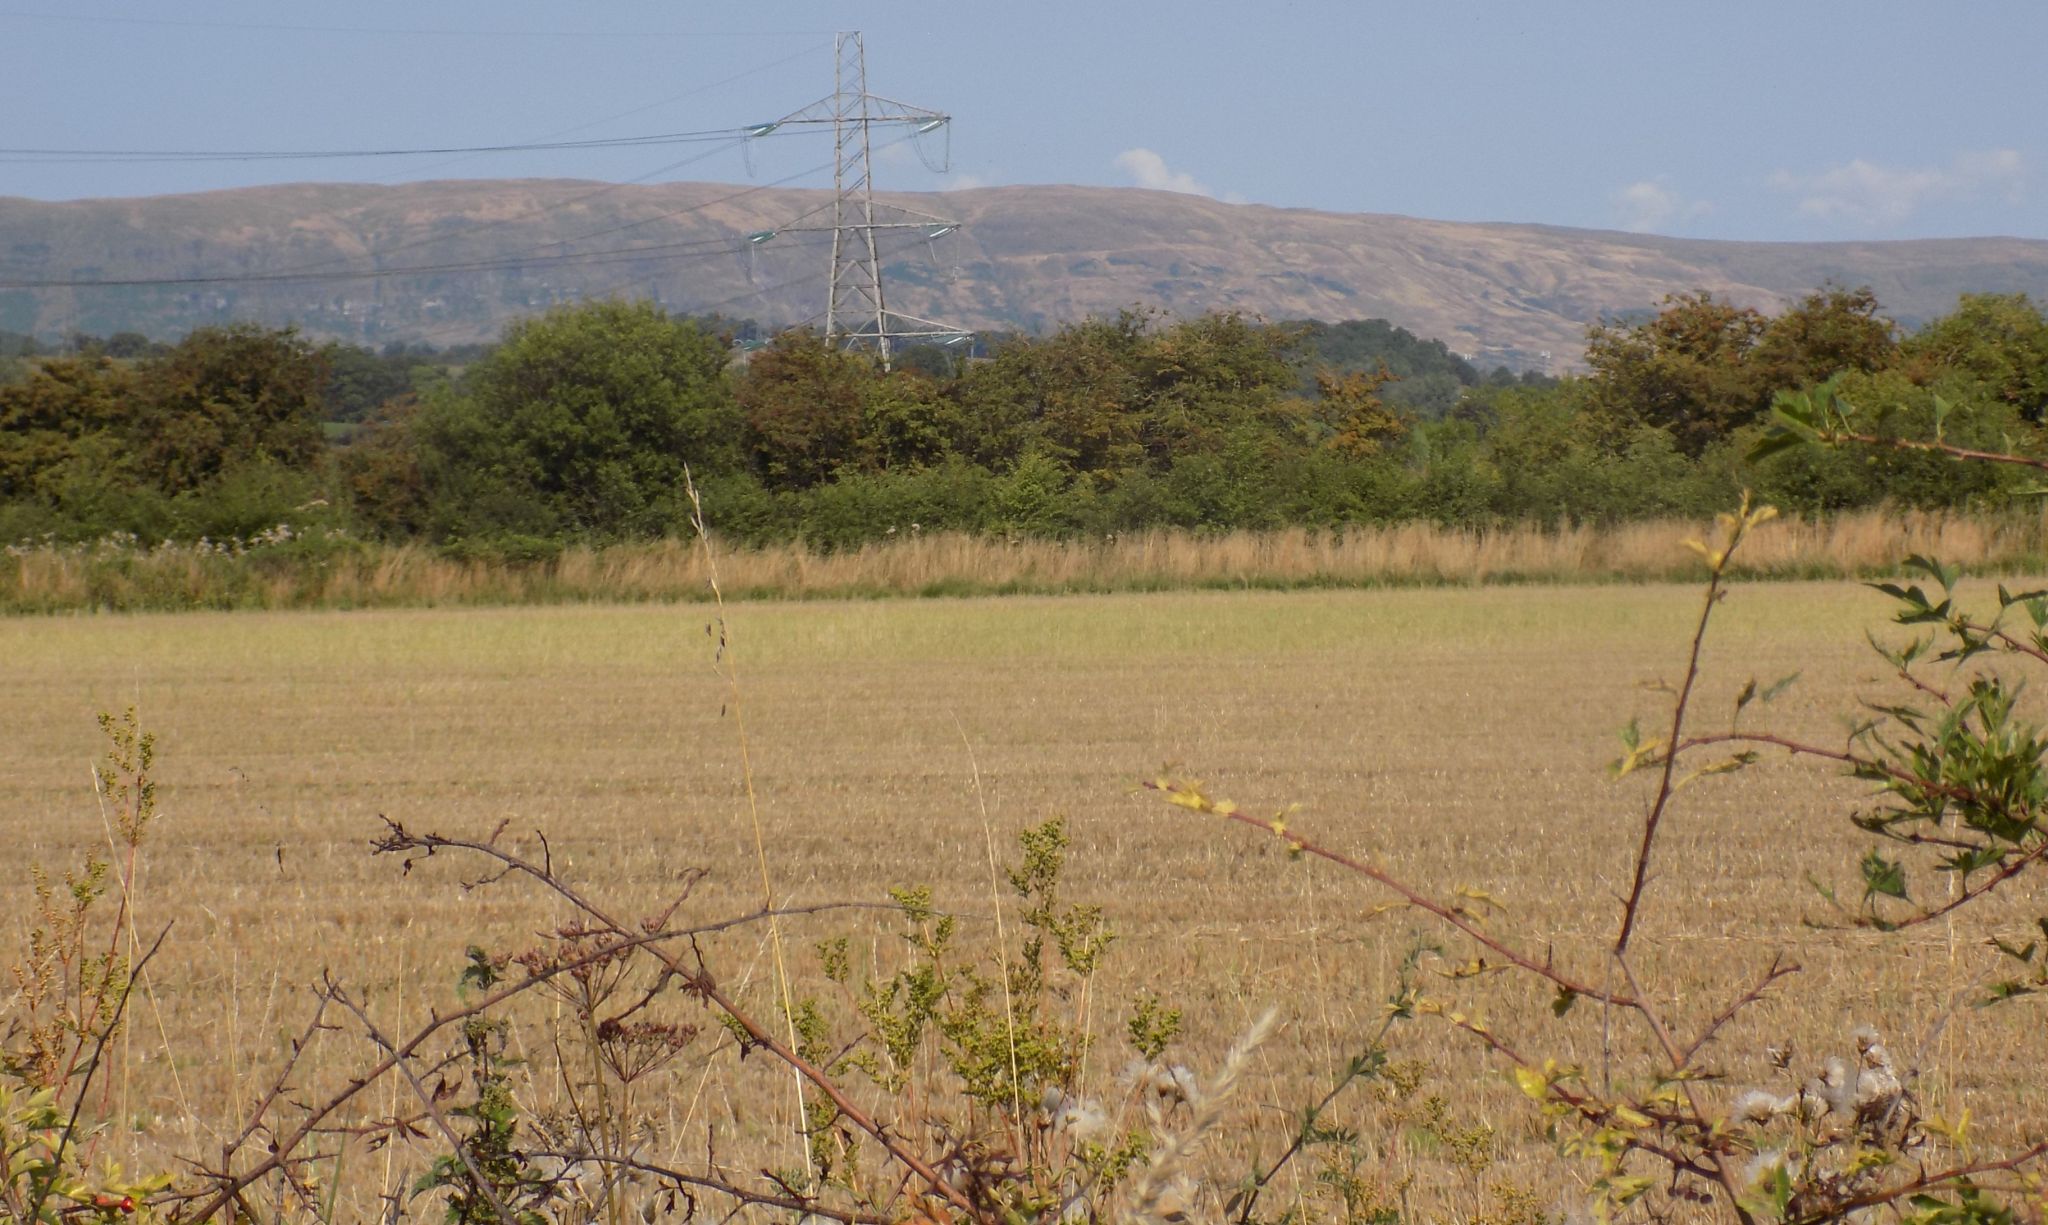 Campsie Fells from the "Back of the Hill " road